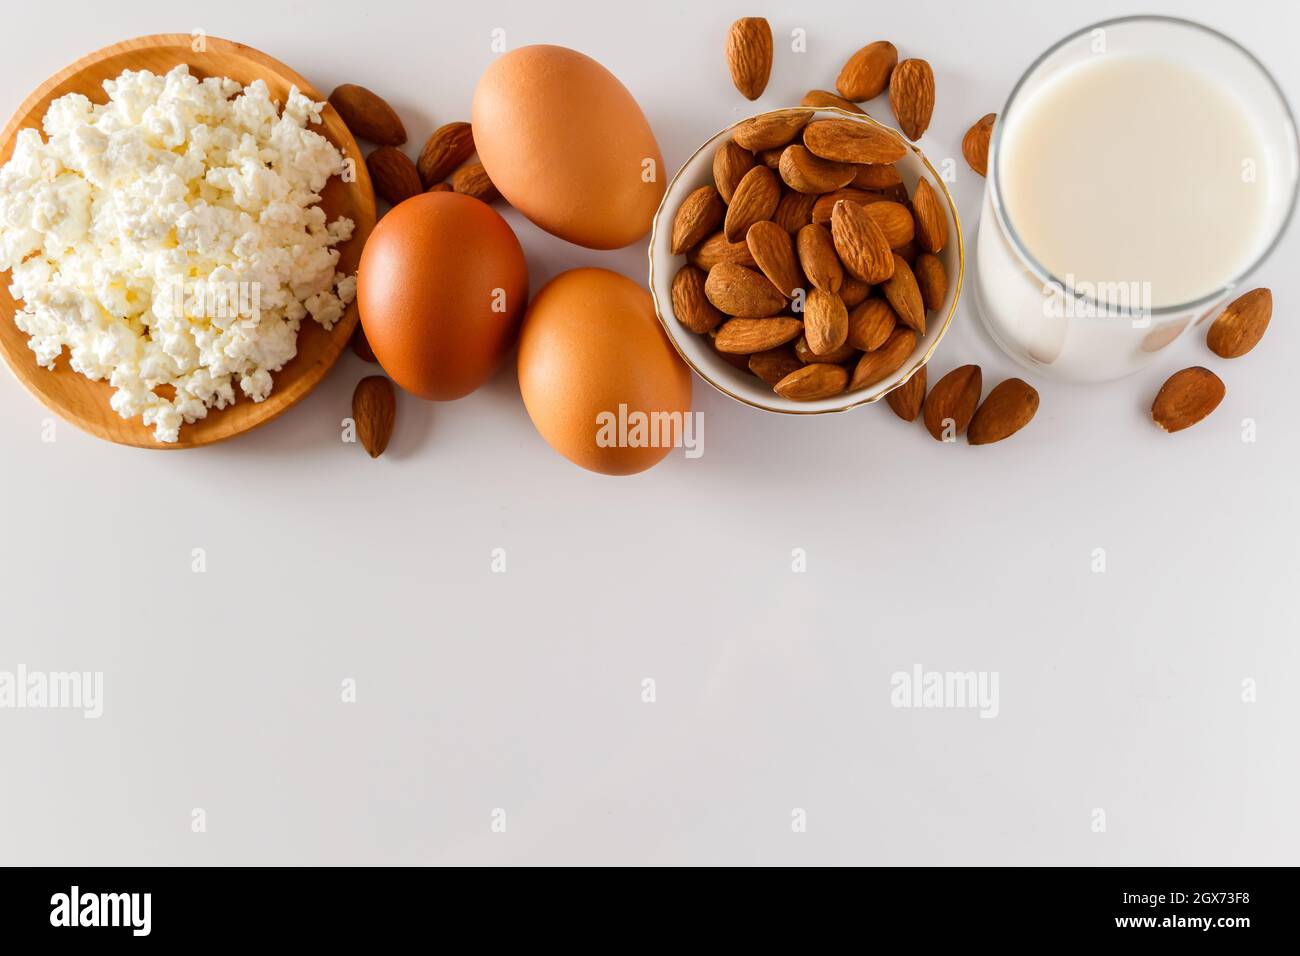 High protein food on a white background - cottage cheese, eggs, nuts. A set of healthy foods for a balanced diet. Stock Photo